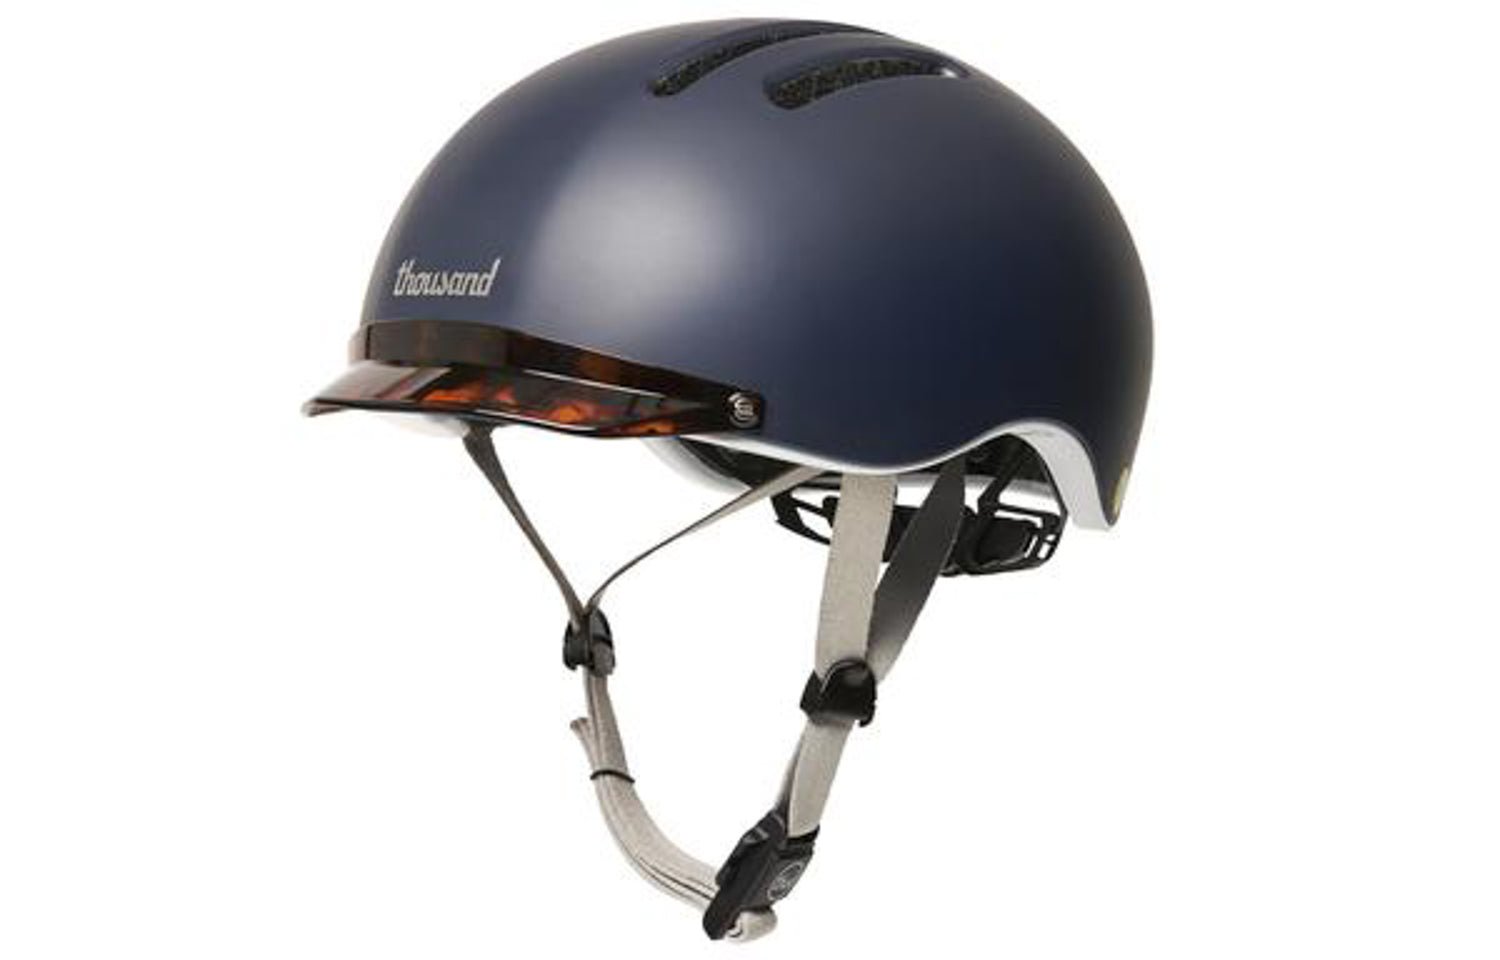 Thousand Chapter Premium Helmet with MIPS